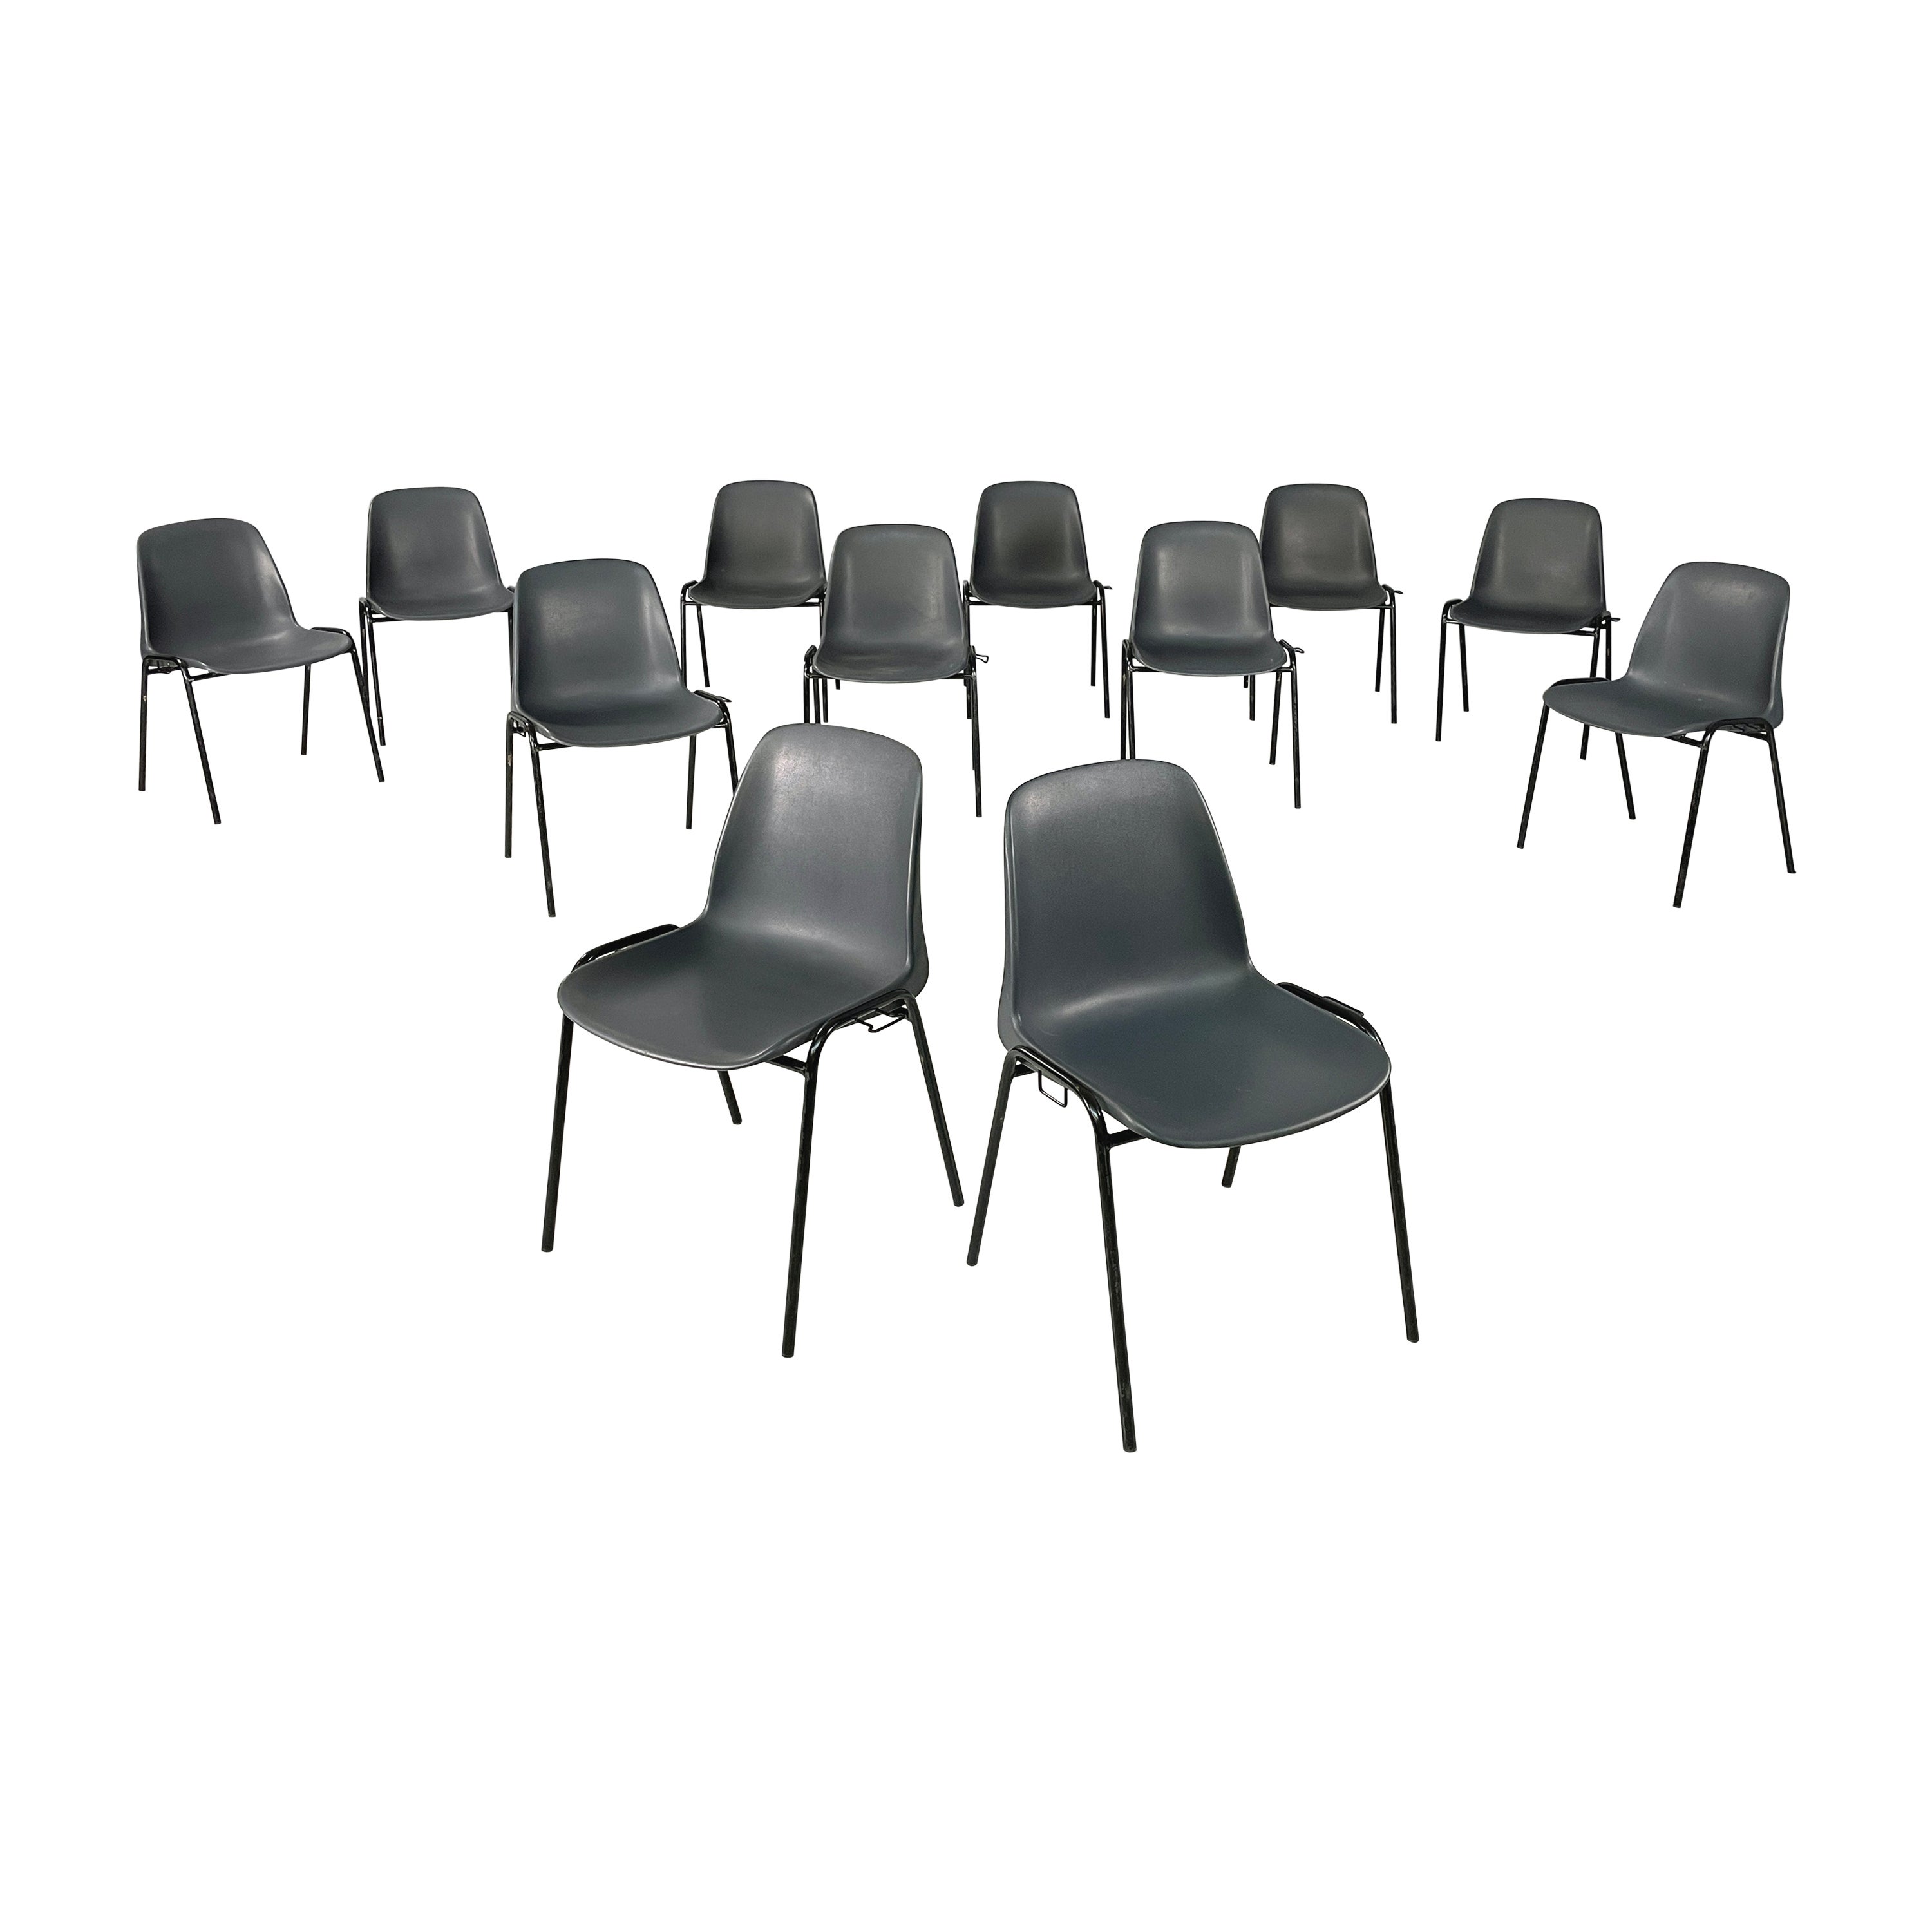 Italian modern Stackable chairs in gray plastic and black metal, 2000s For Sale